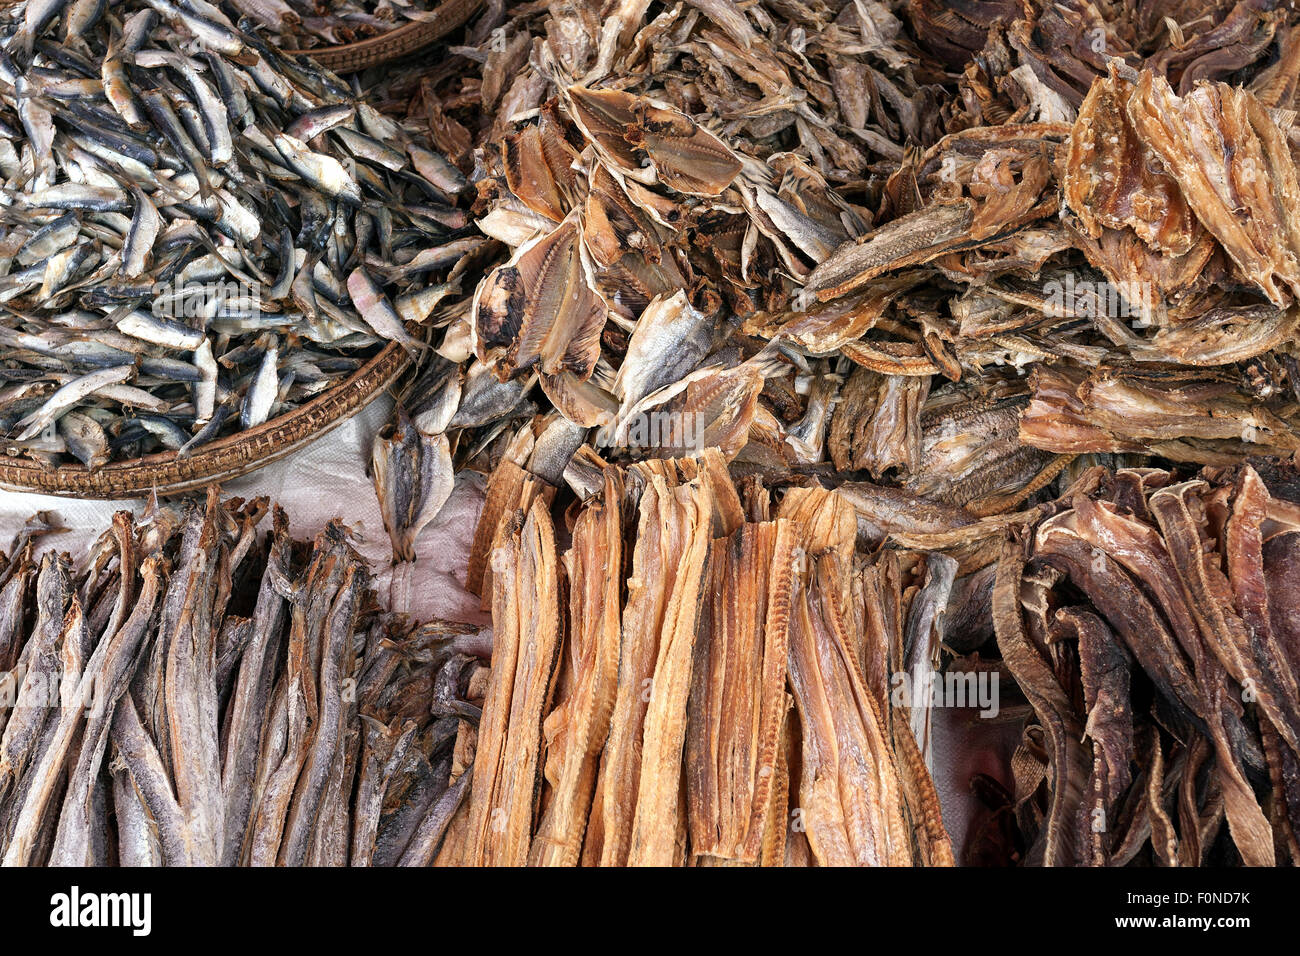 Dry fish at a market, local market in Kyaing Tong, Shan State, Myanmar Stock Photo